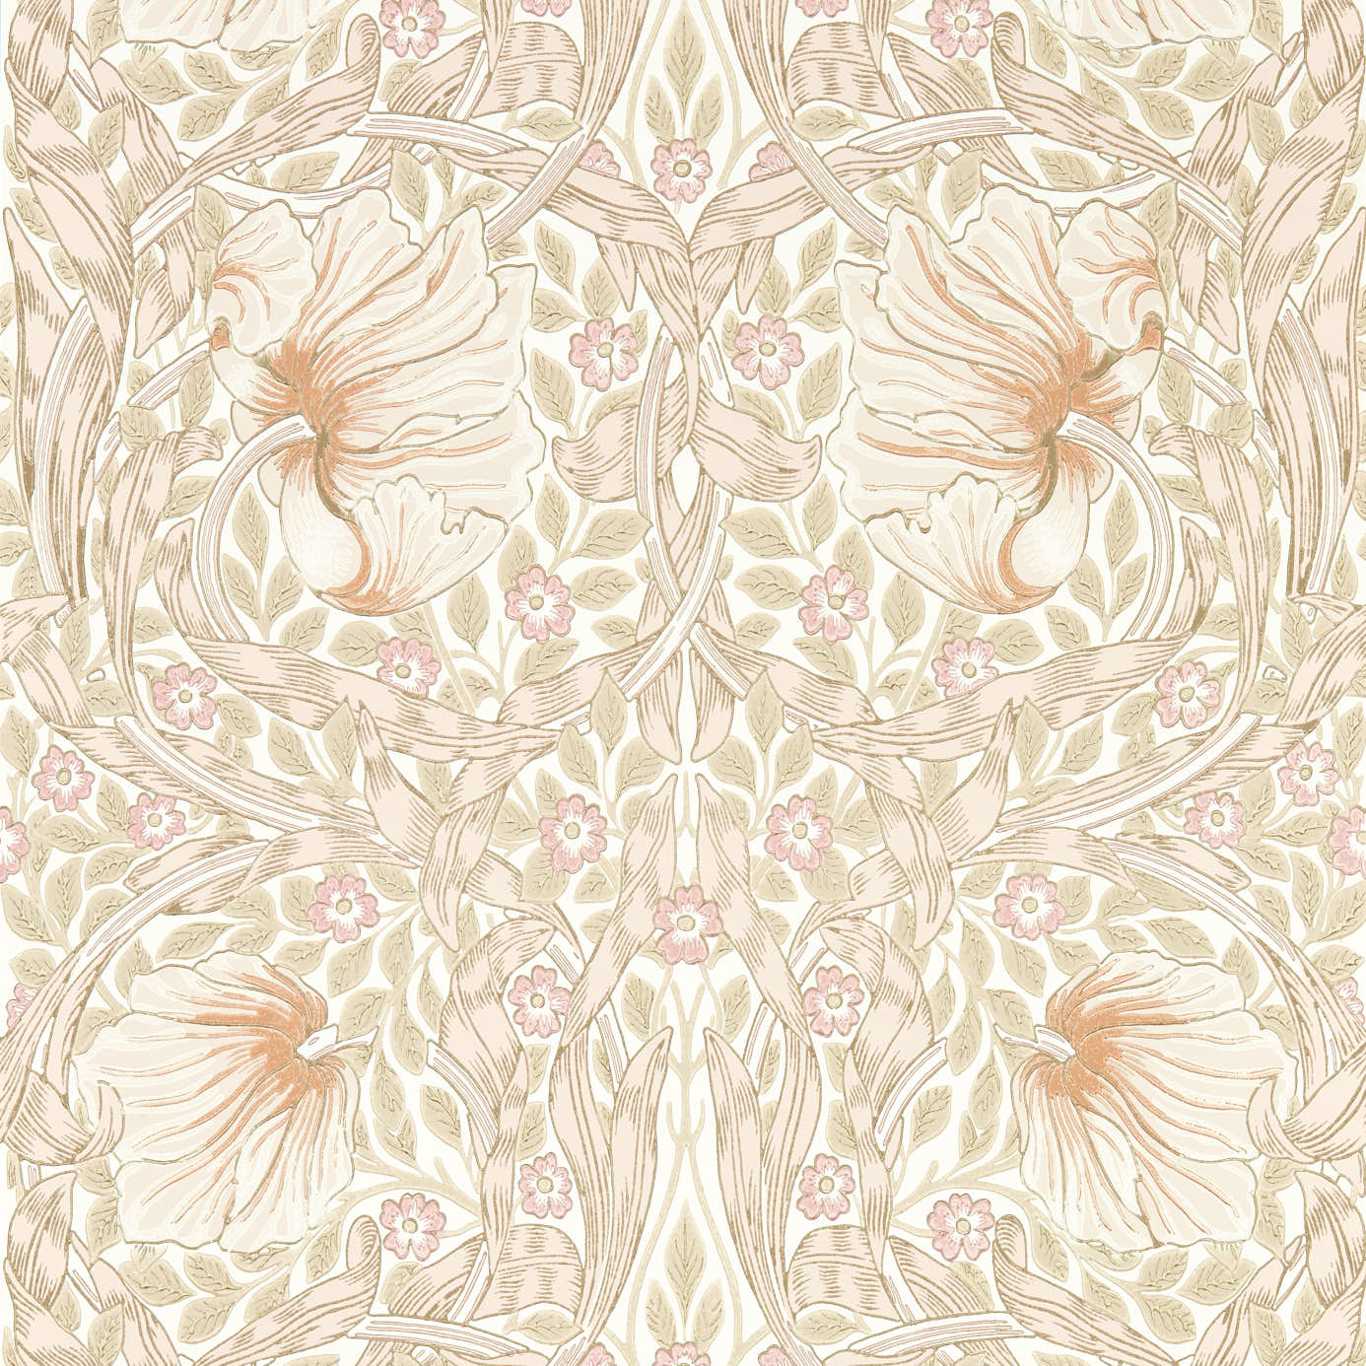 Pimpernel Cochineal Pink Wallpaper MSIM217064 by Morris & Co